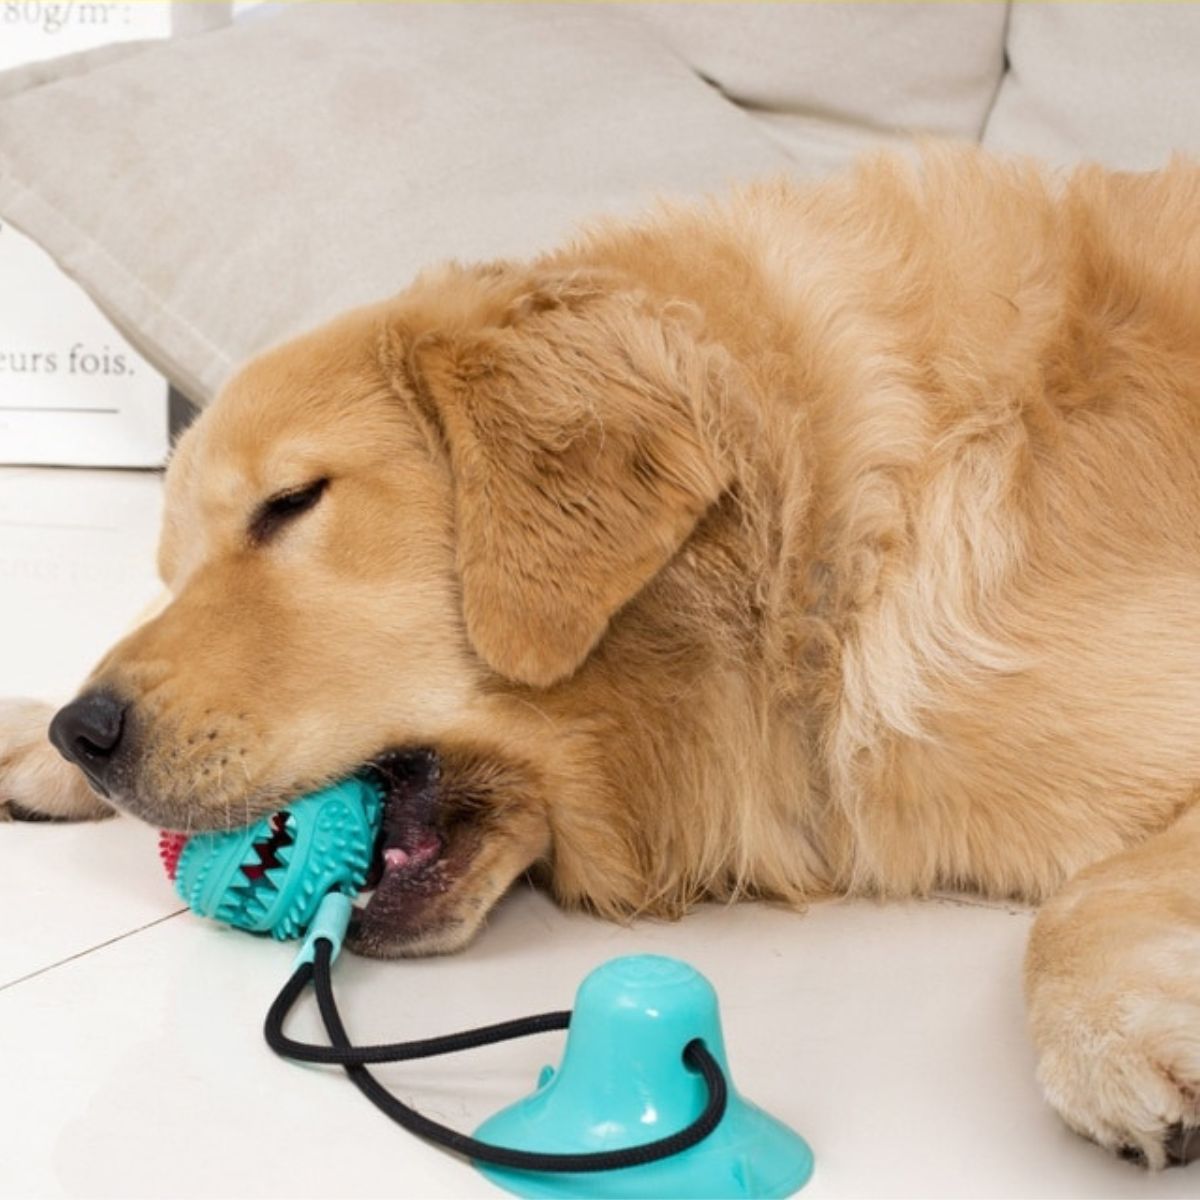 A golden retriever playing with dog tug toy Chewy ball blue